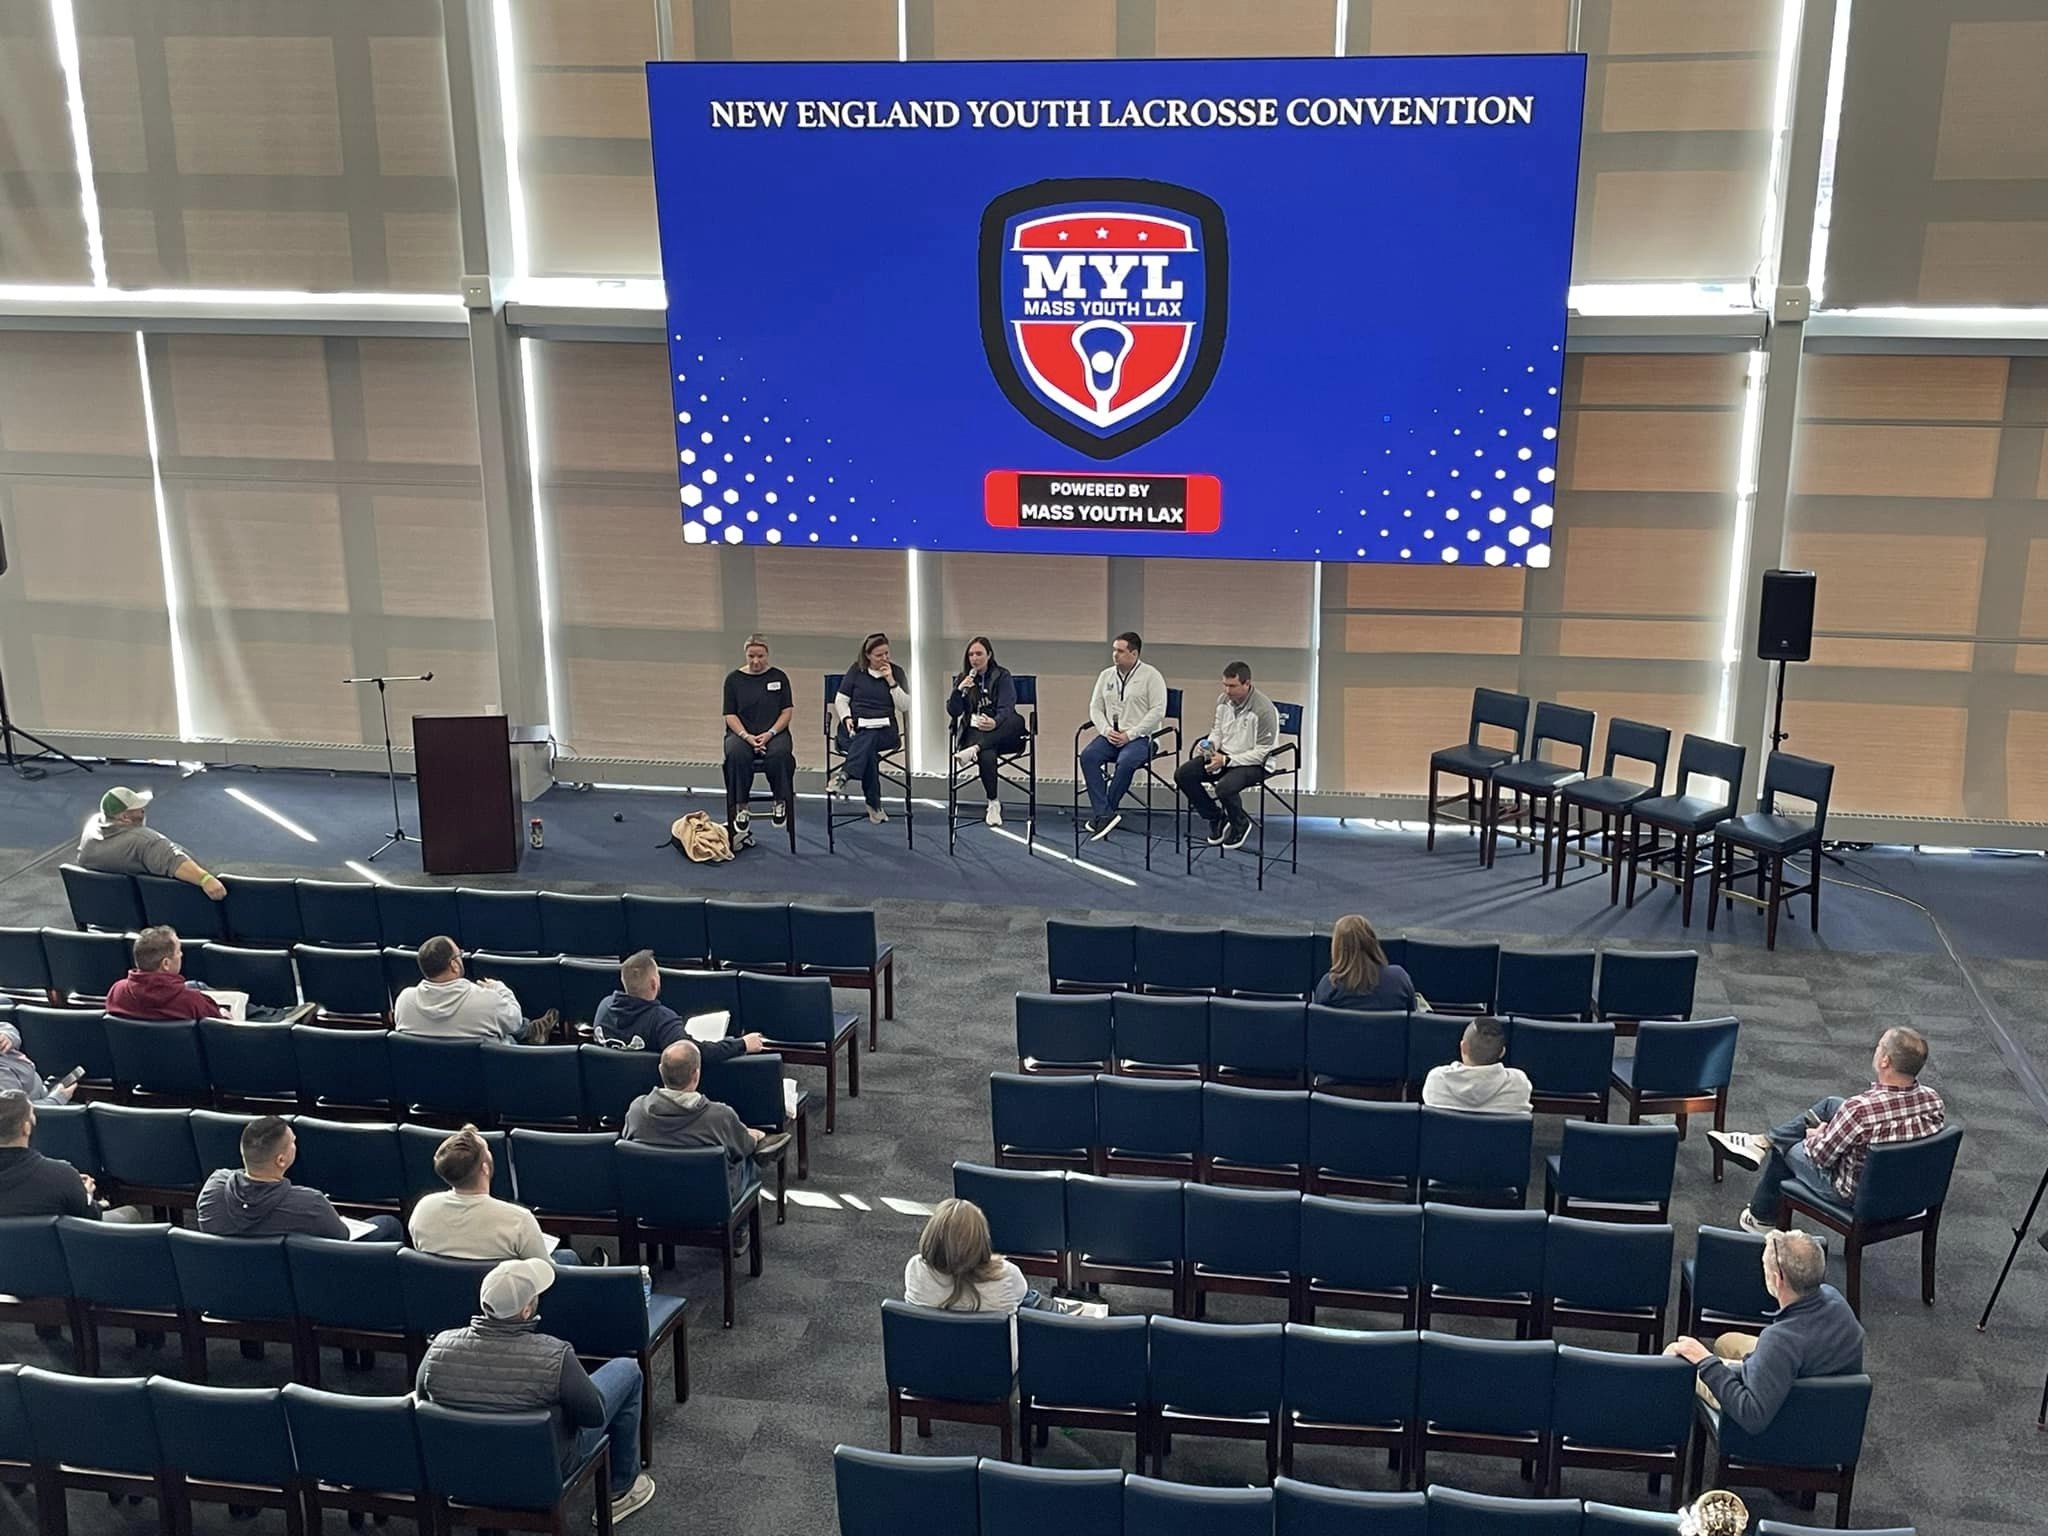 New England Youth Lacrosse Convention